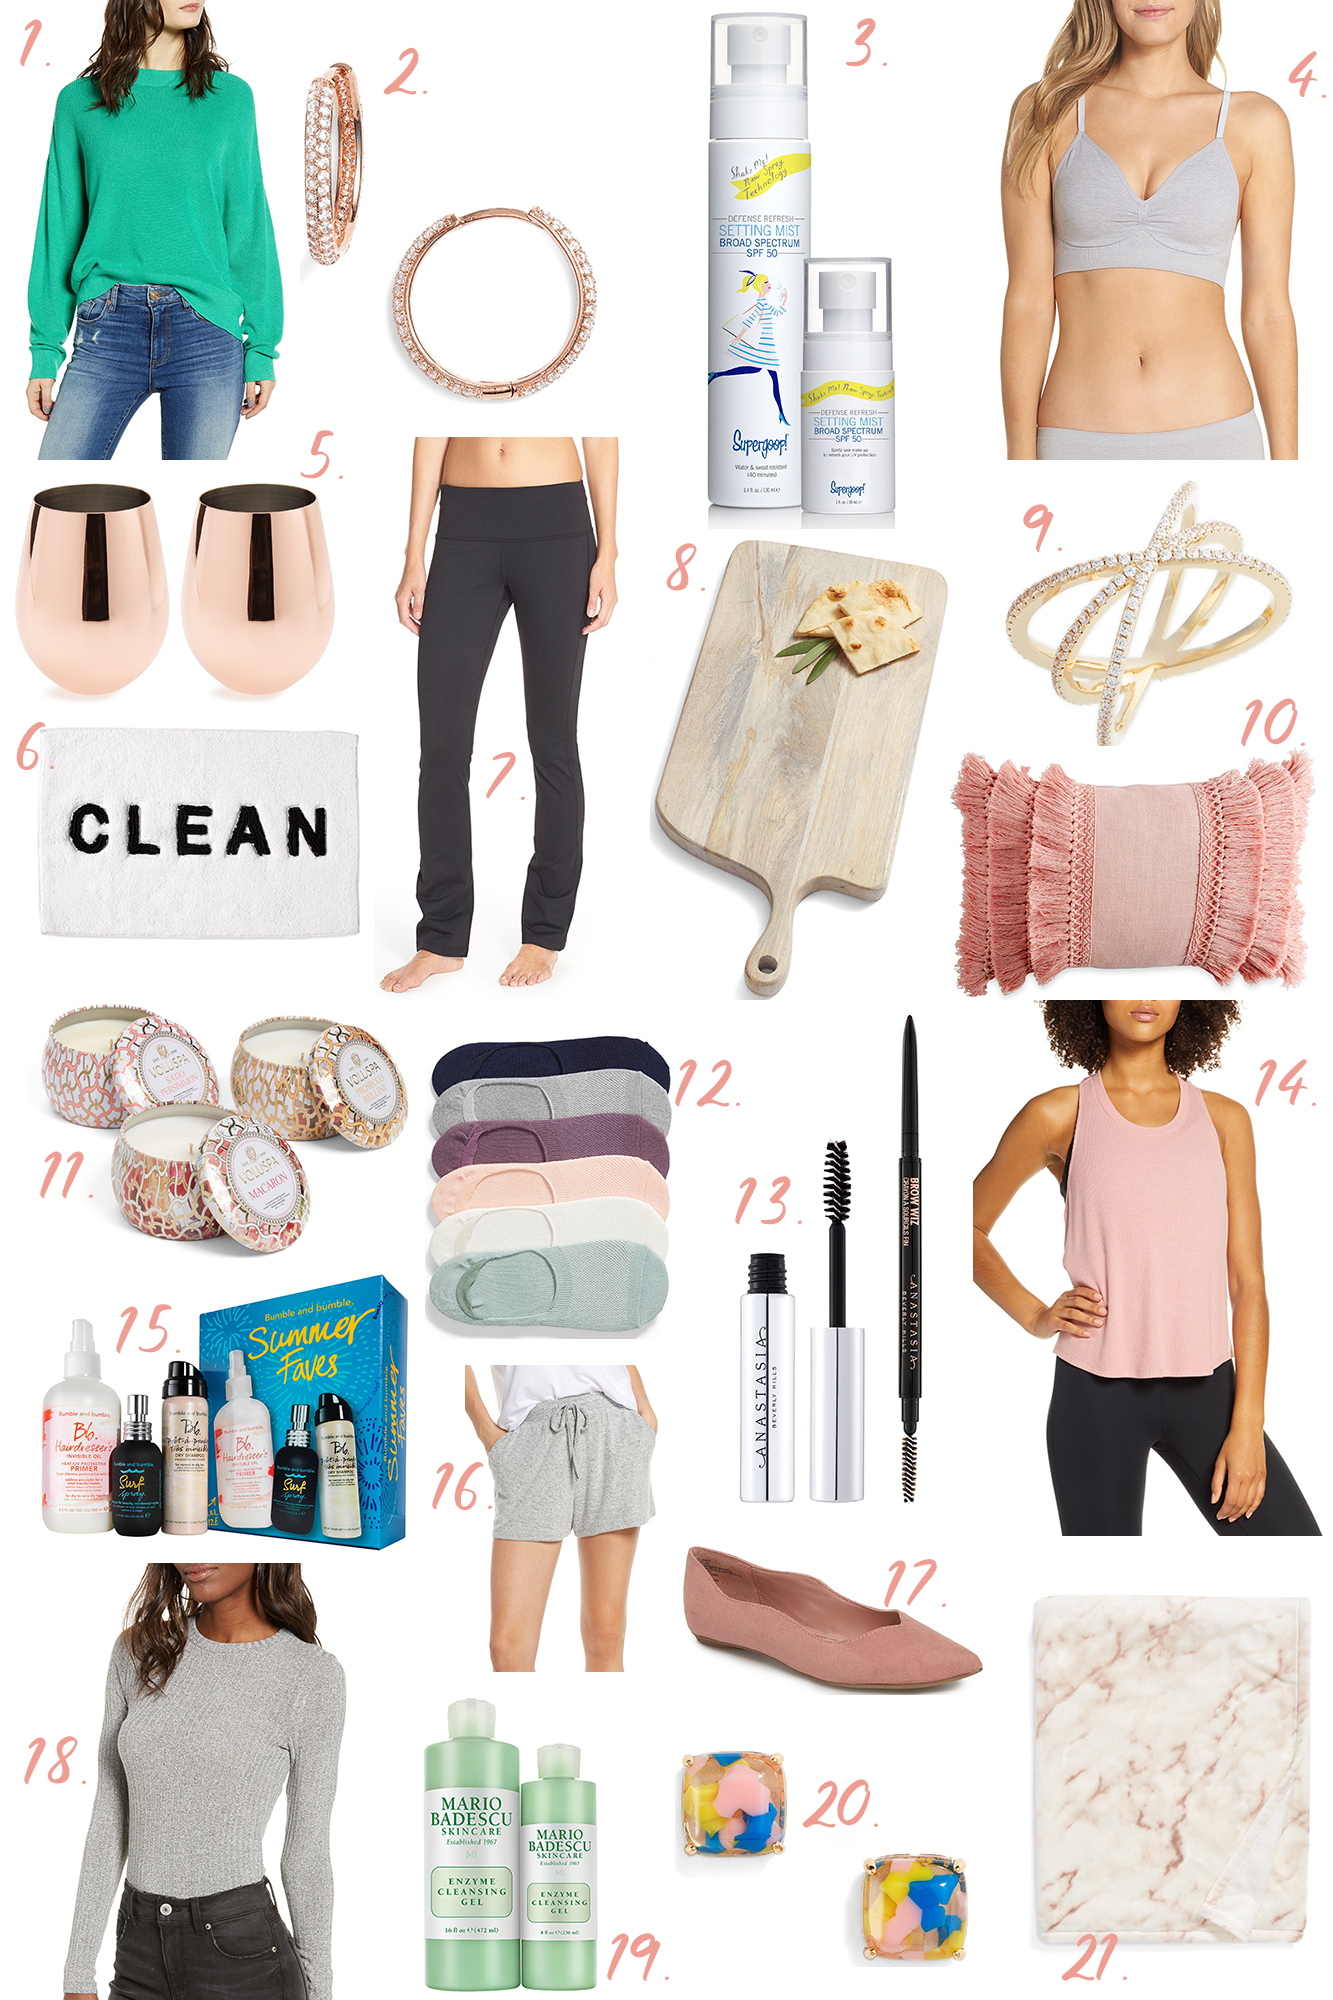 Nordstrom Anniversary Sale 2019 on a budget - Rounded up my NSale favorites under $30 in all categories: fashion, shoes, beauty, home and more!